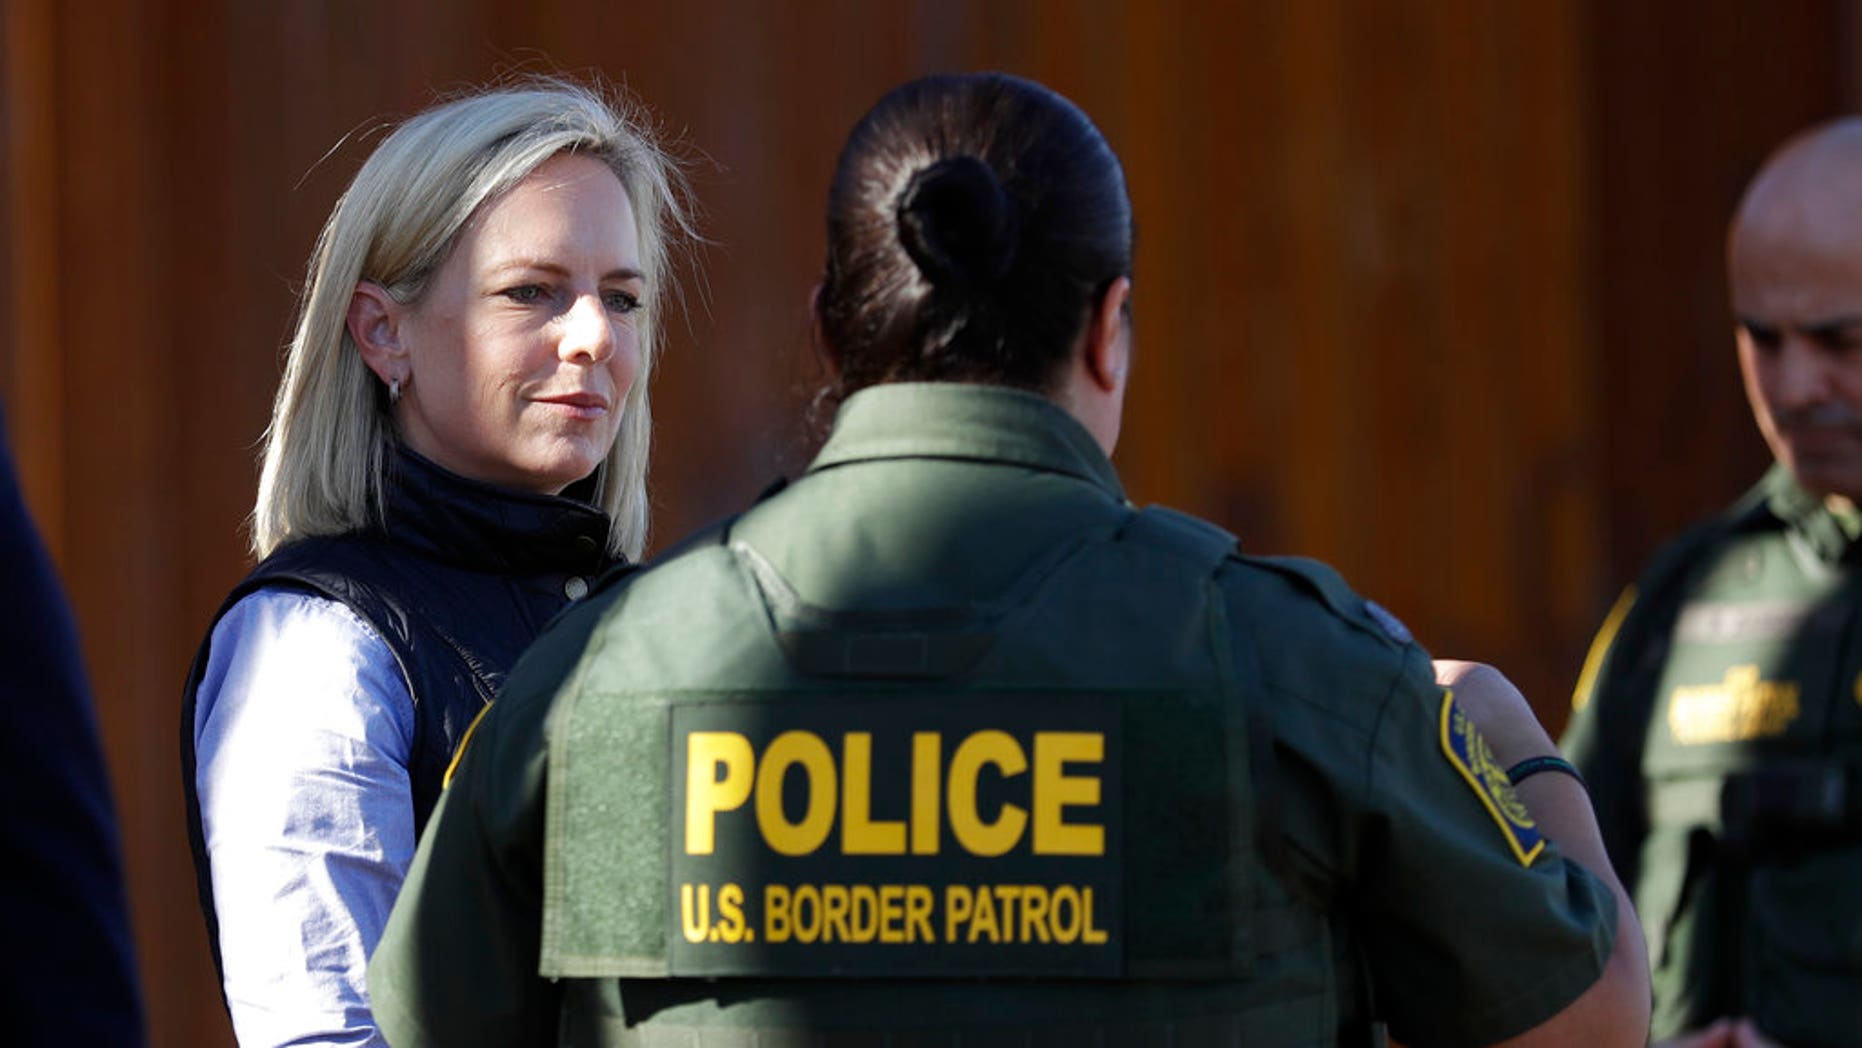 U.S. Department of Homeland Security Secretary Kirstjen Nielsen, left, speaks with Border Patrol agents near a newly fortified border wall structure in Calexico, Calif. (AP Photo/Gregory Bull)